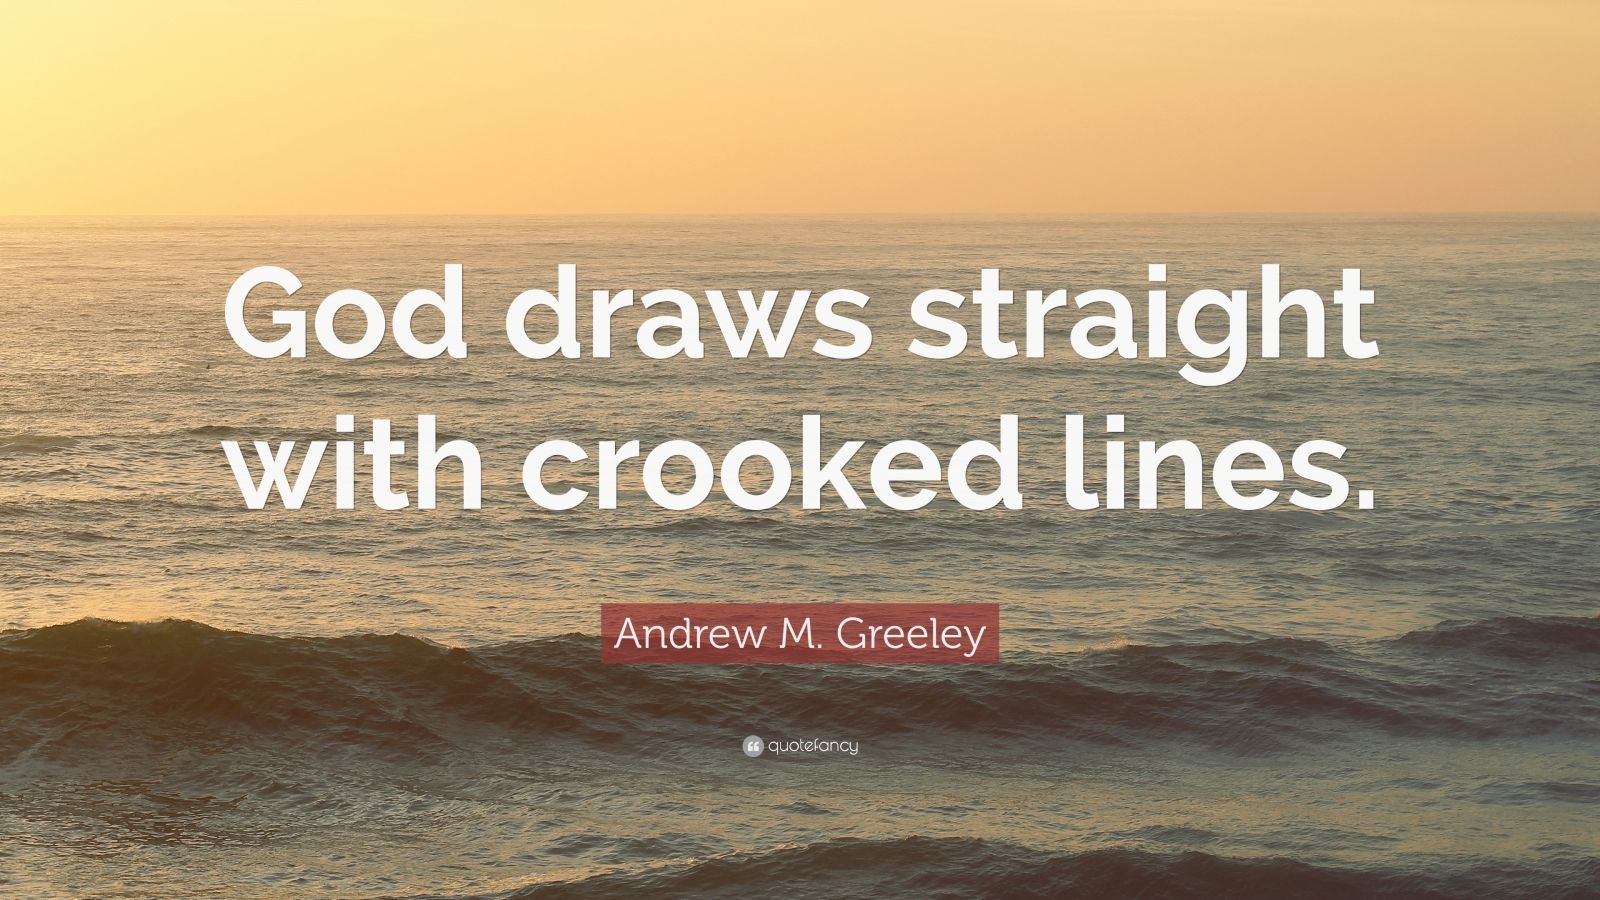 Andrew M. Greeley Quote “God draws straight with crooked lines.” (7